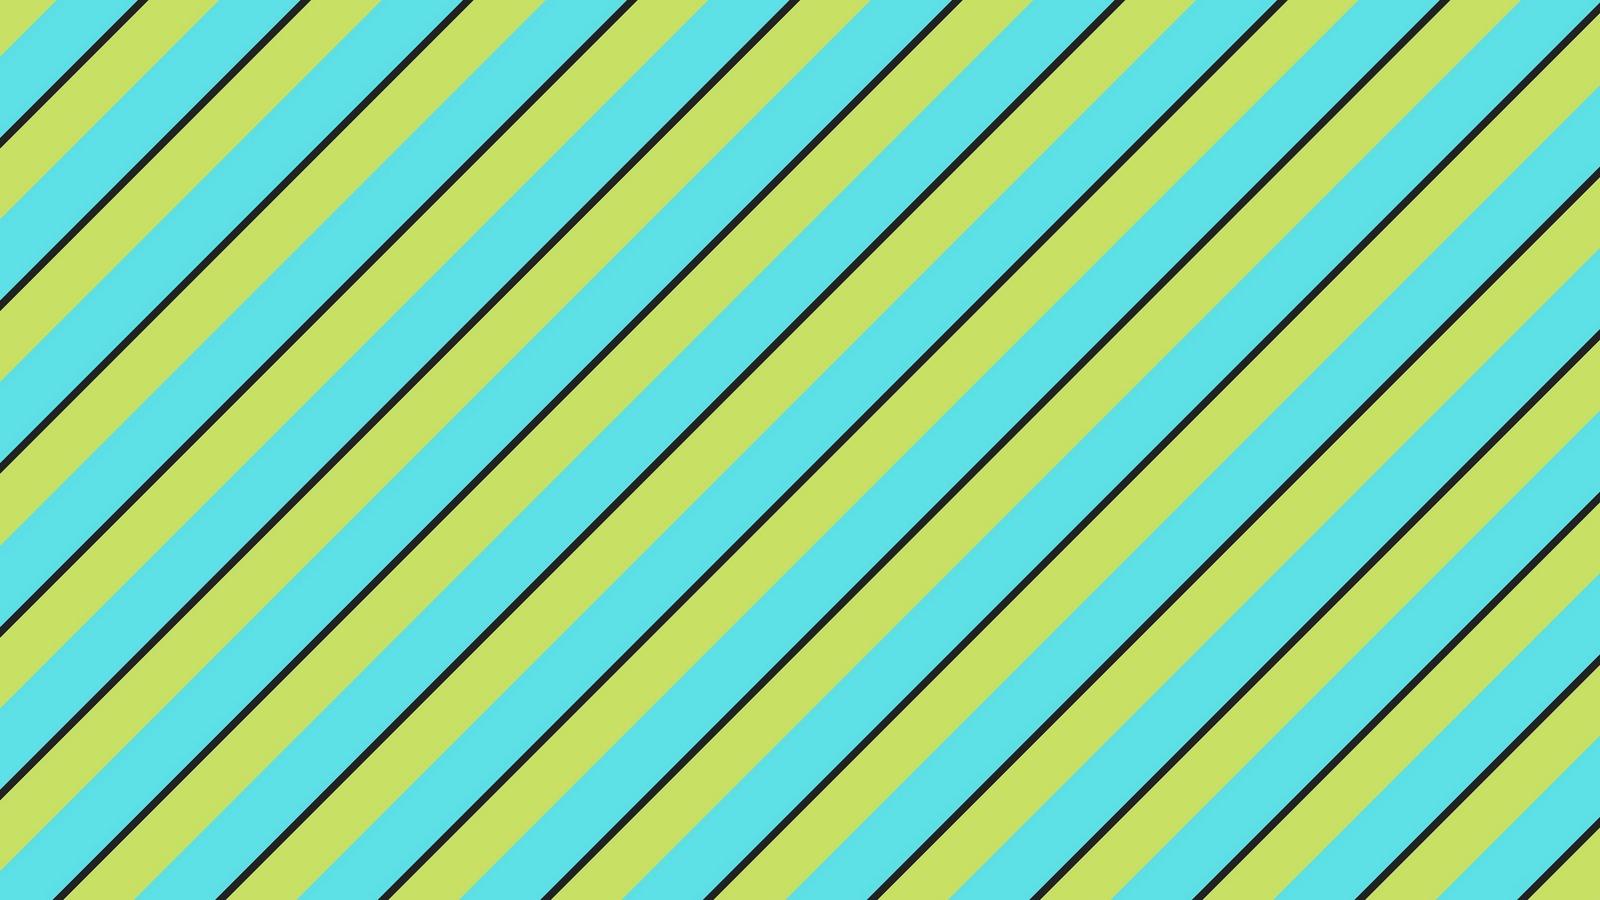 Download wallpaper 1600x900 lines, diagonally, background, yellow